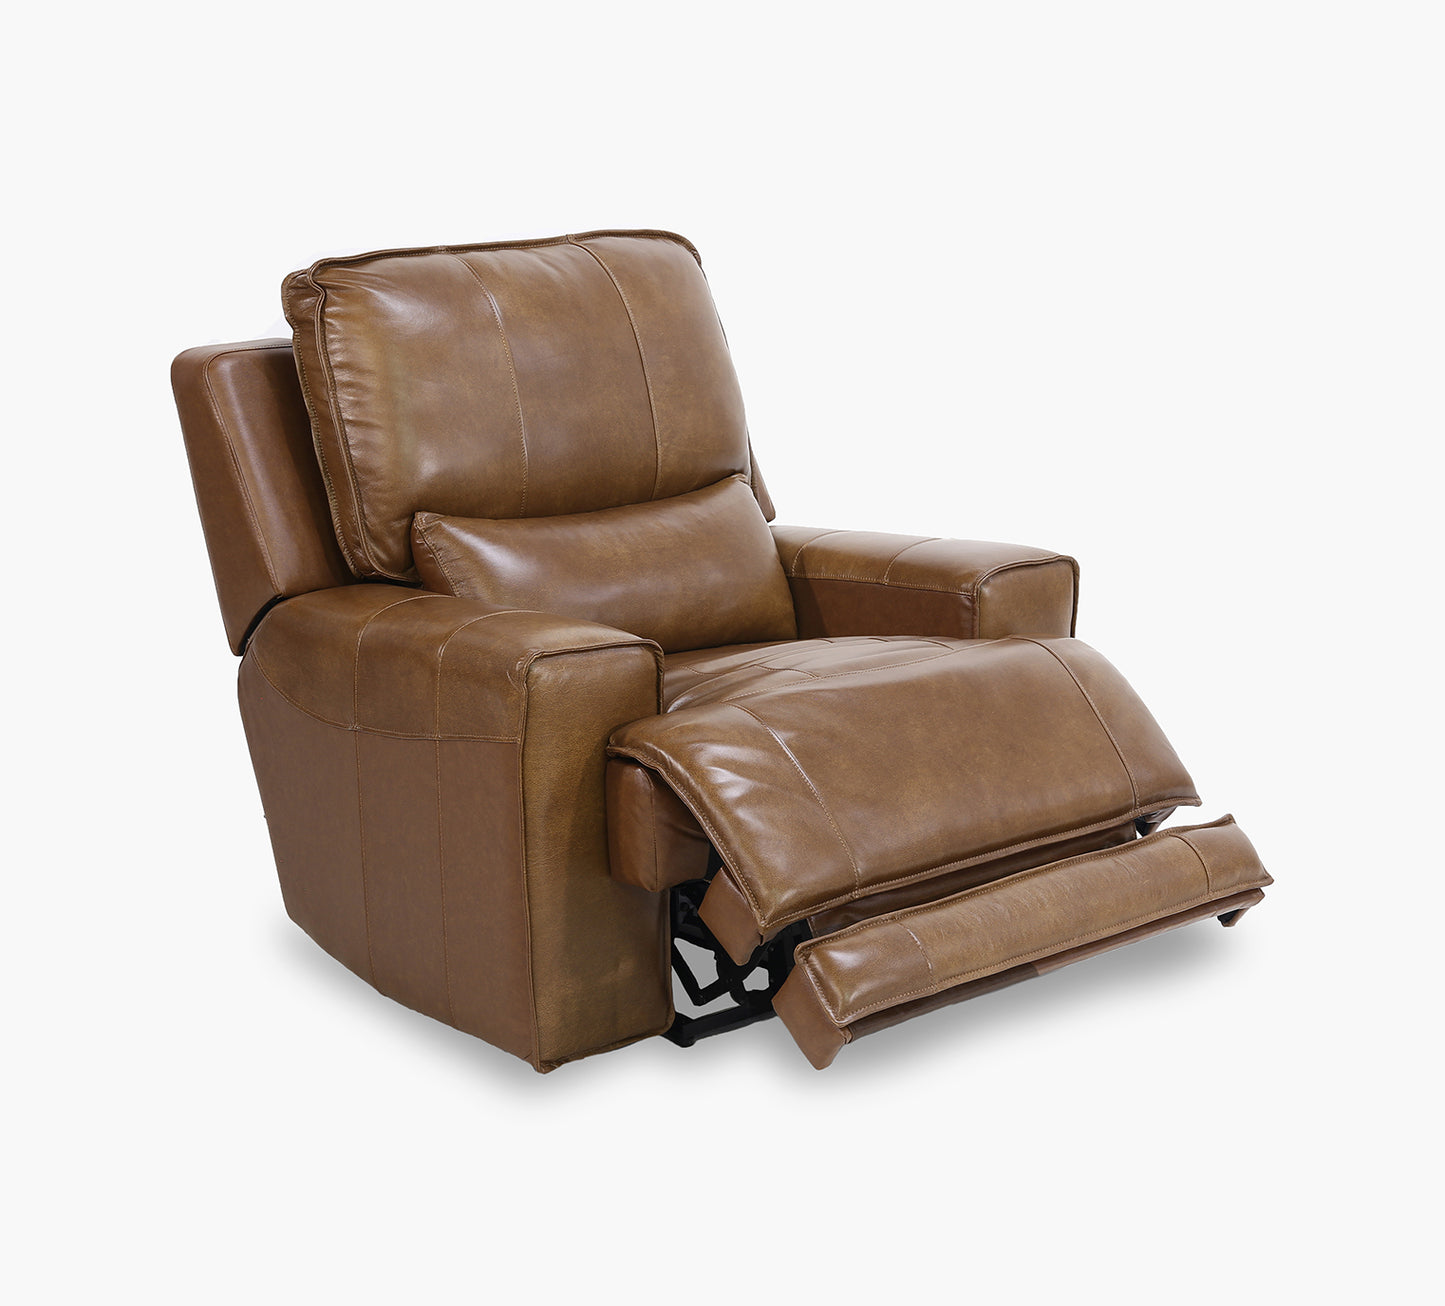 Renegade Leather Recliner